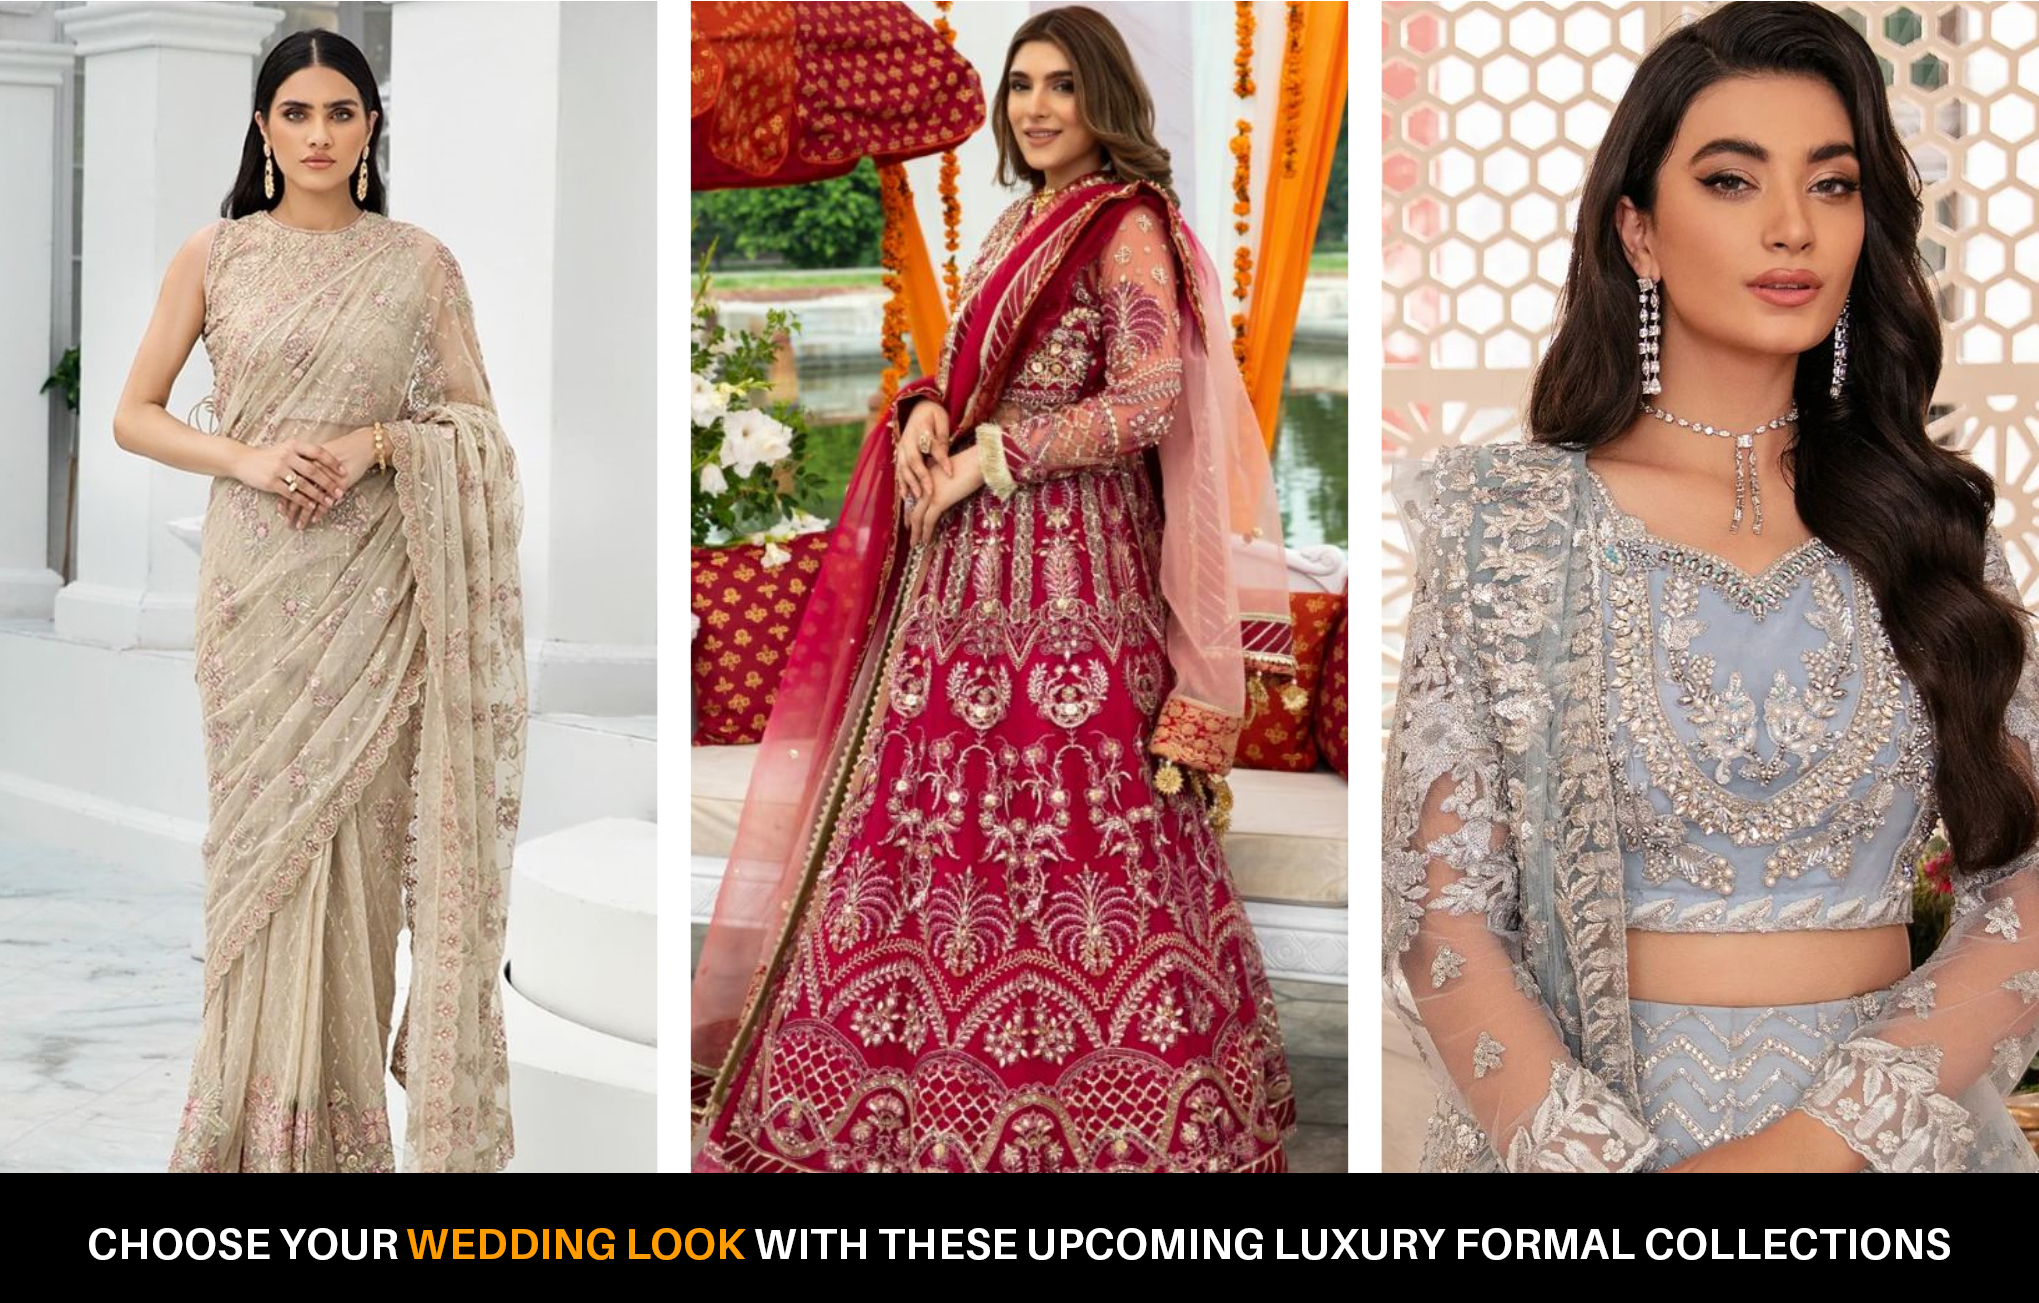 Choose Your Wedding Look With These Upcoming Luxury Formal Collections